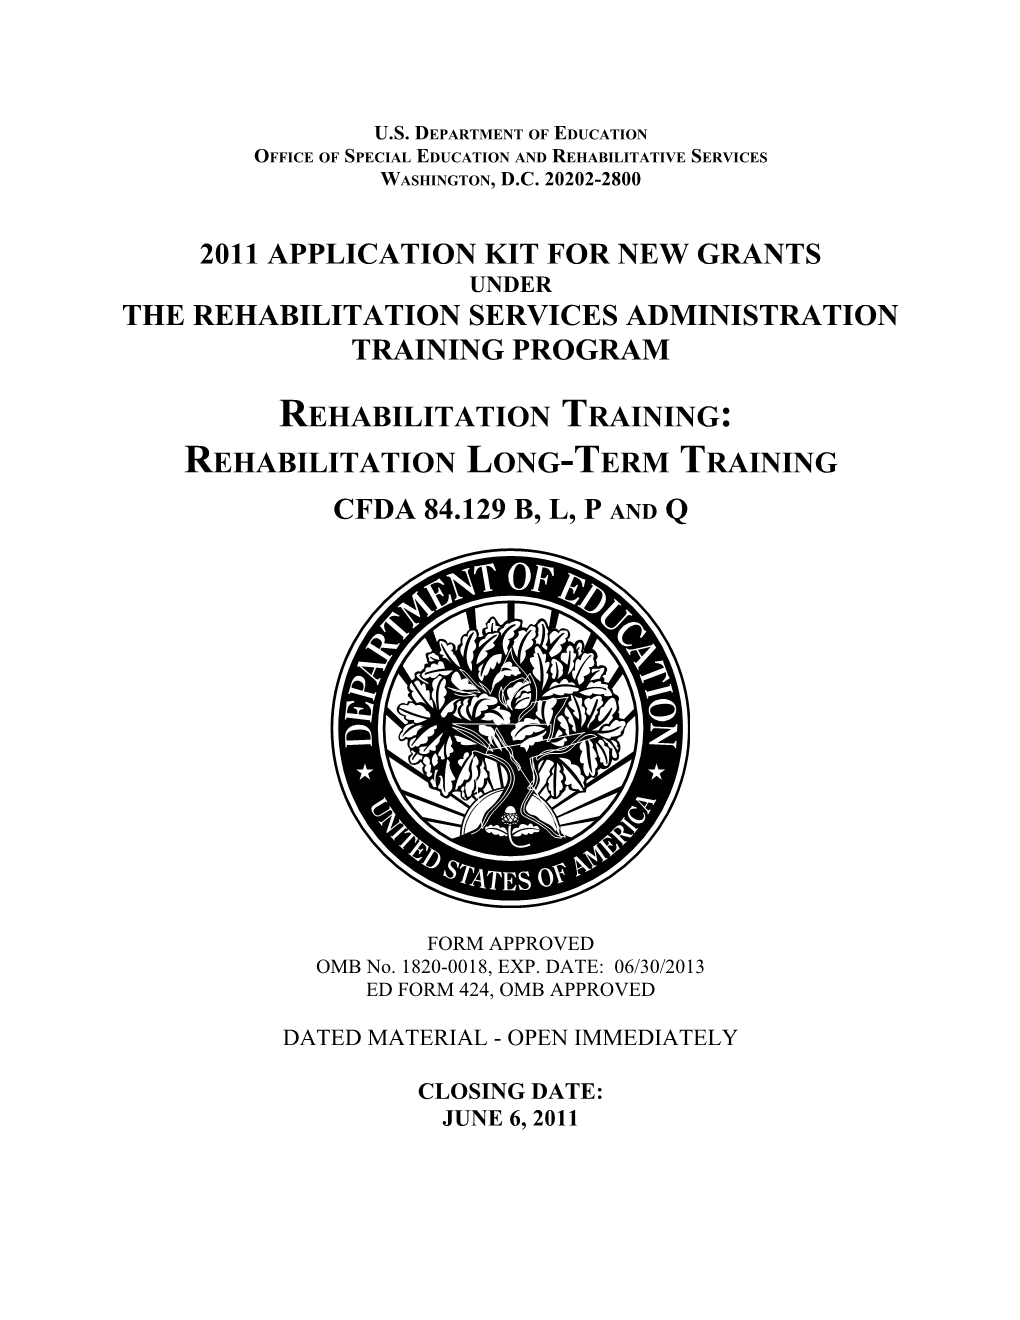 FY11 Application for New Grants Under the Rehabilitation Services Administration Training